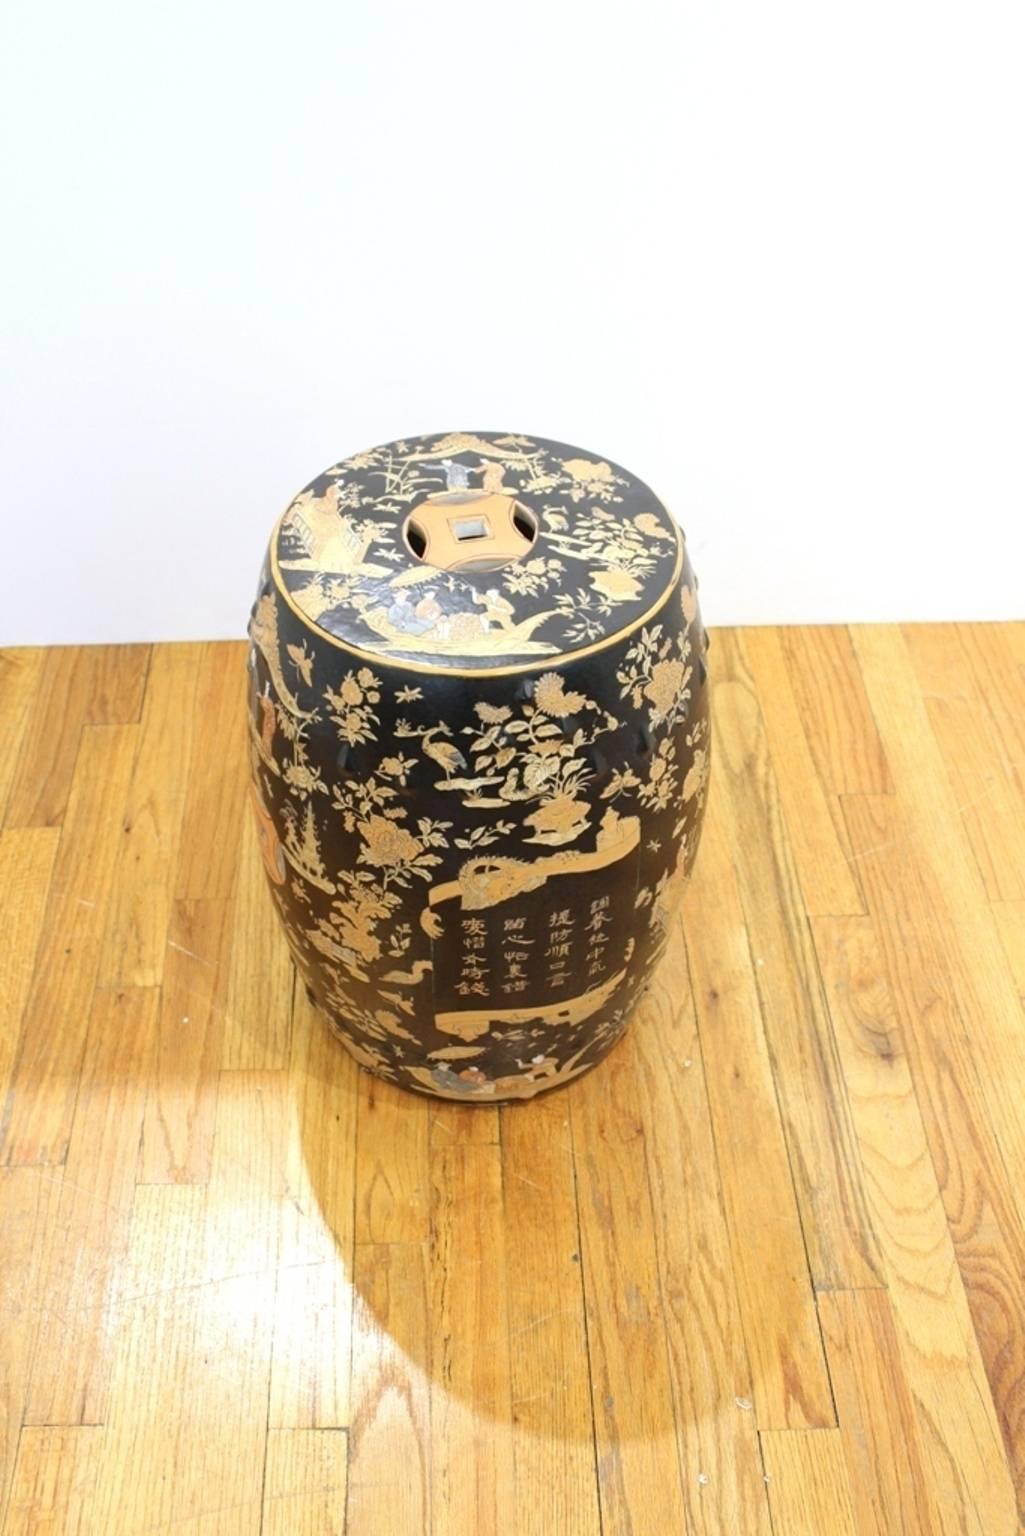 Chinoiserie Garden Stool with Landscapes 1